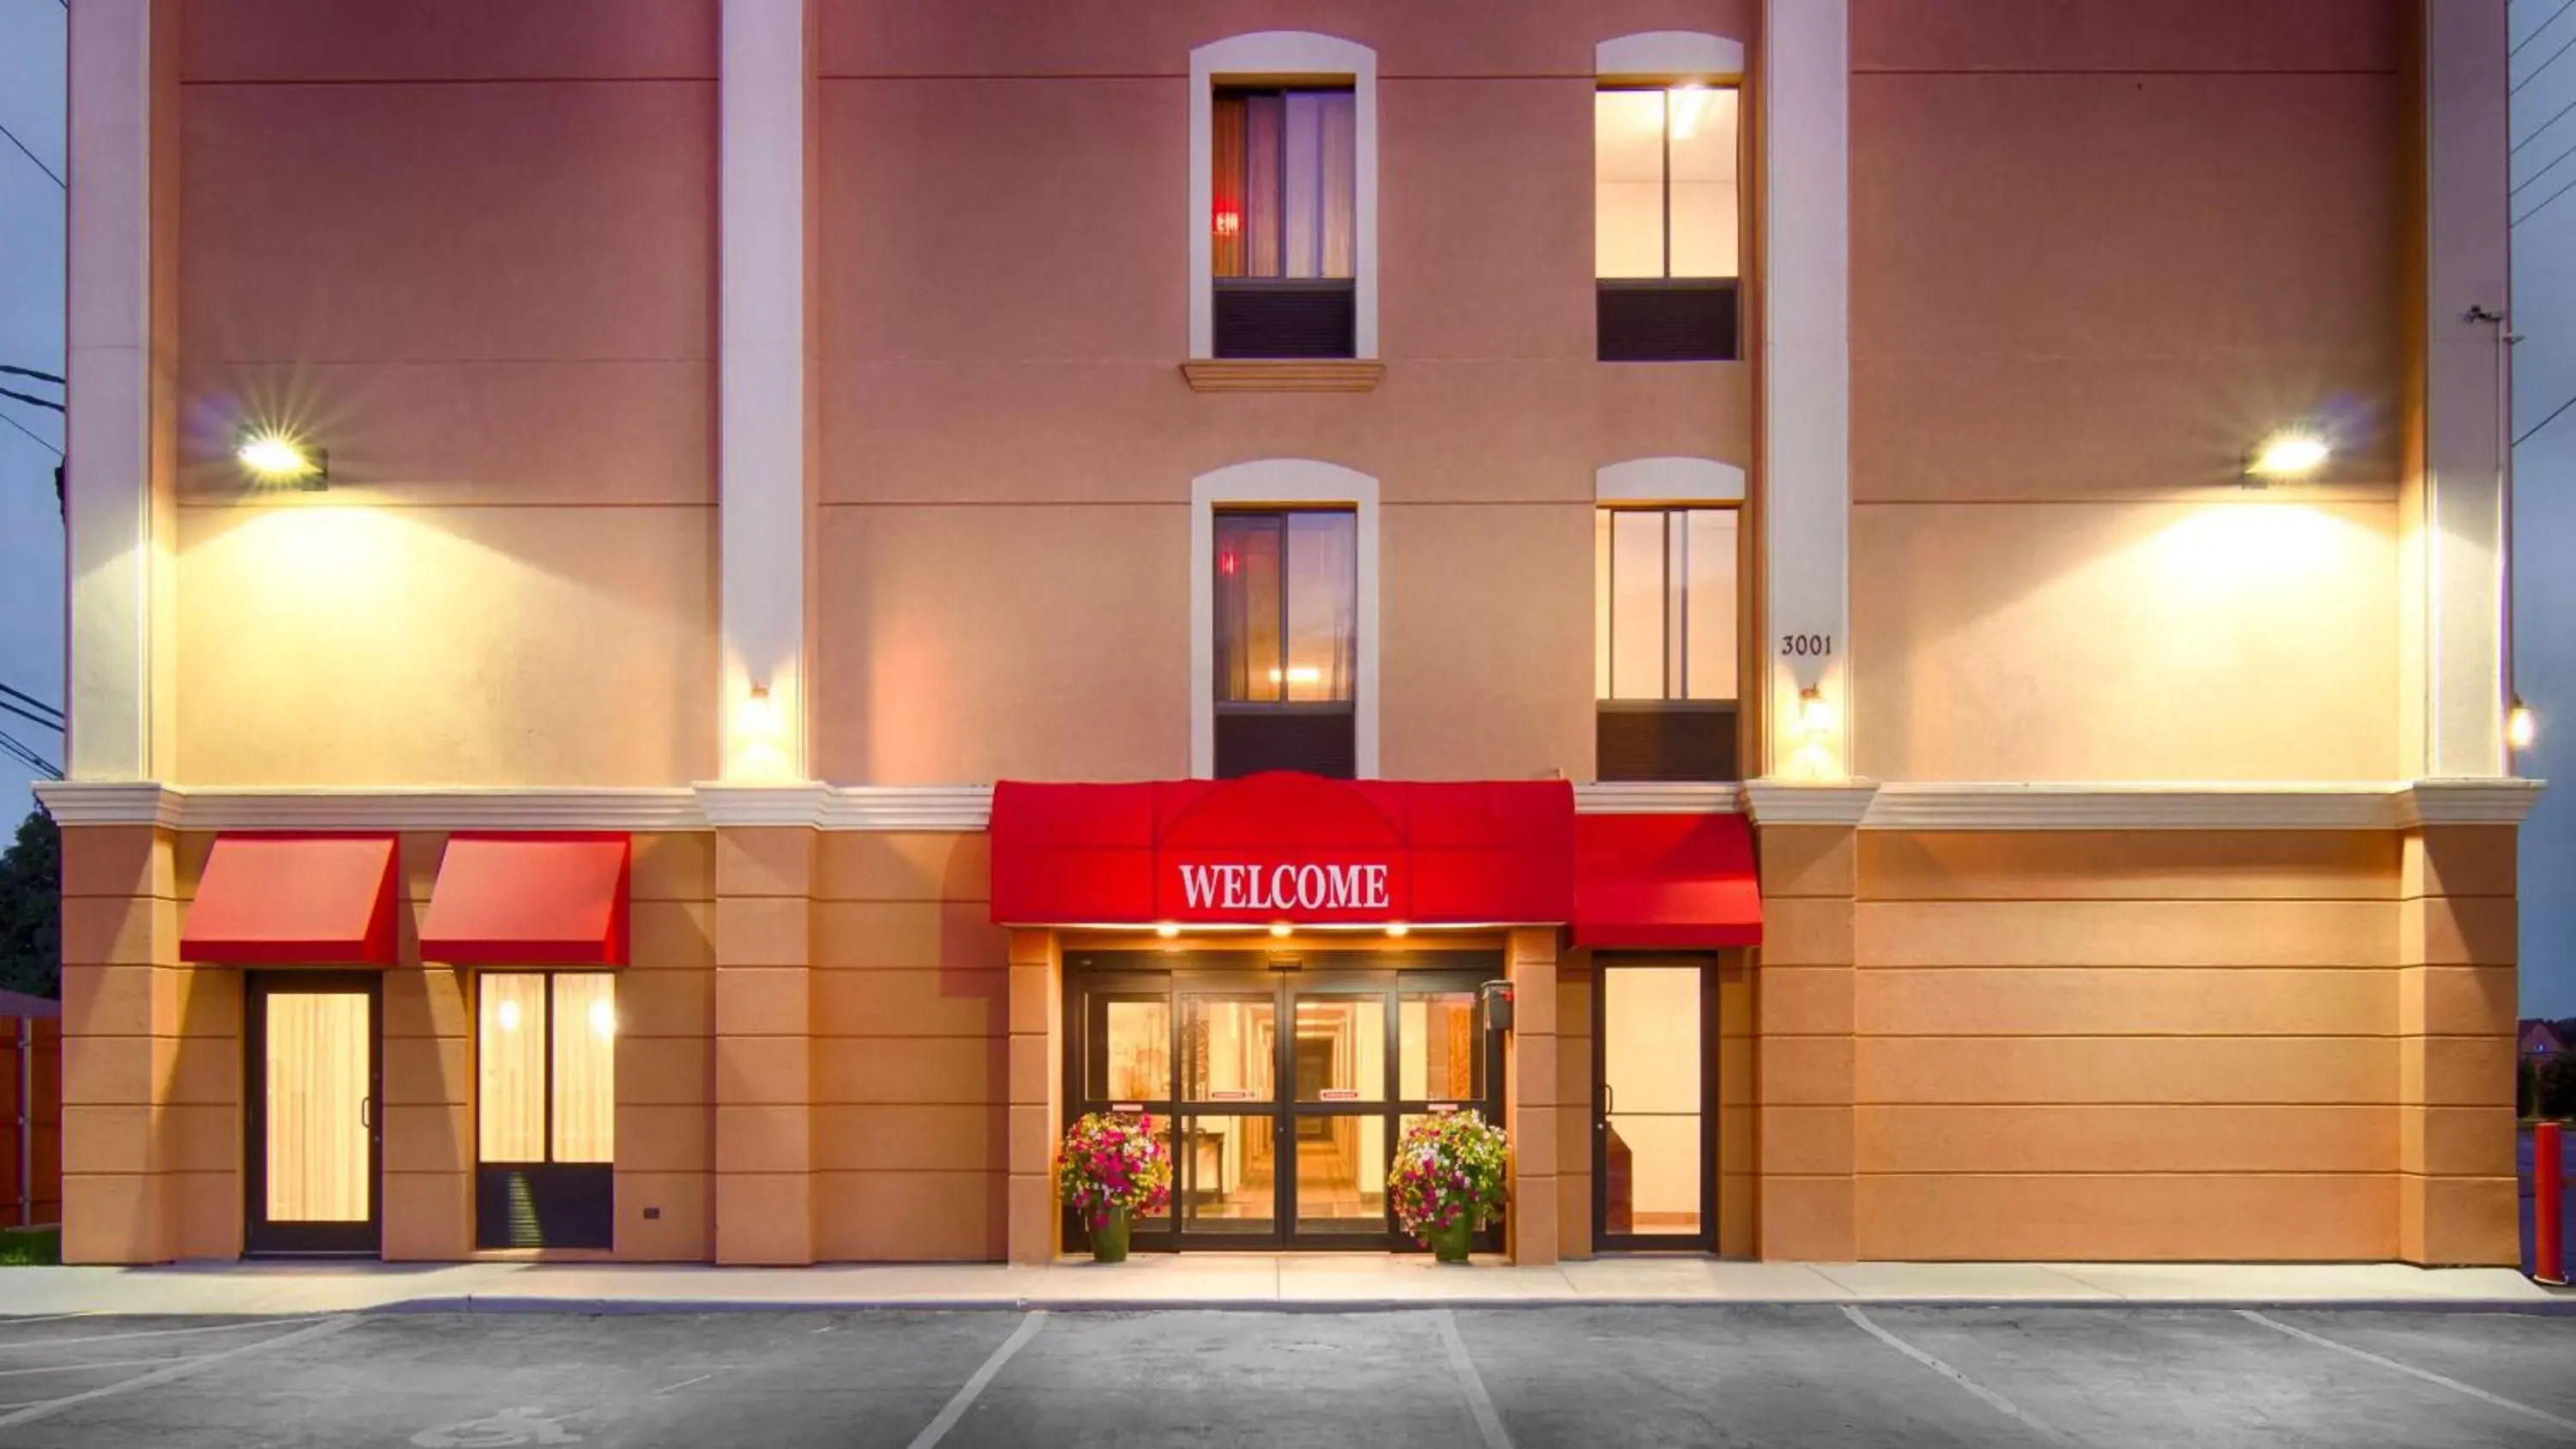 Property building in Best Western Plus O'hare International South Hotel